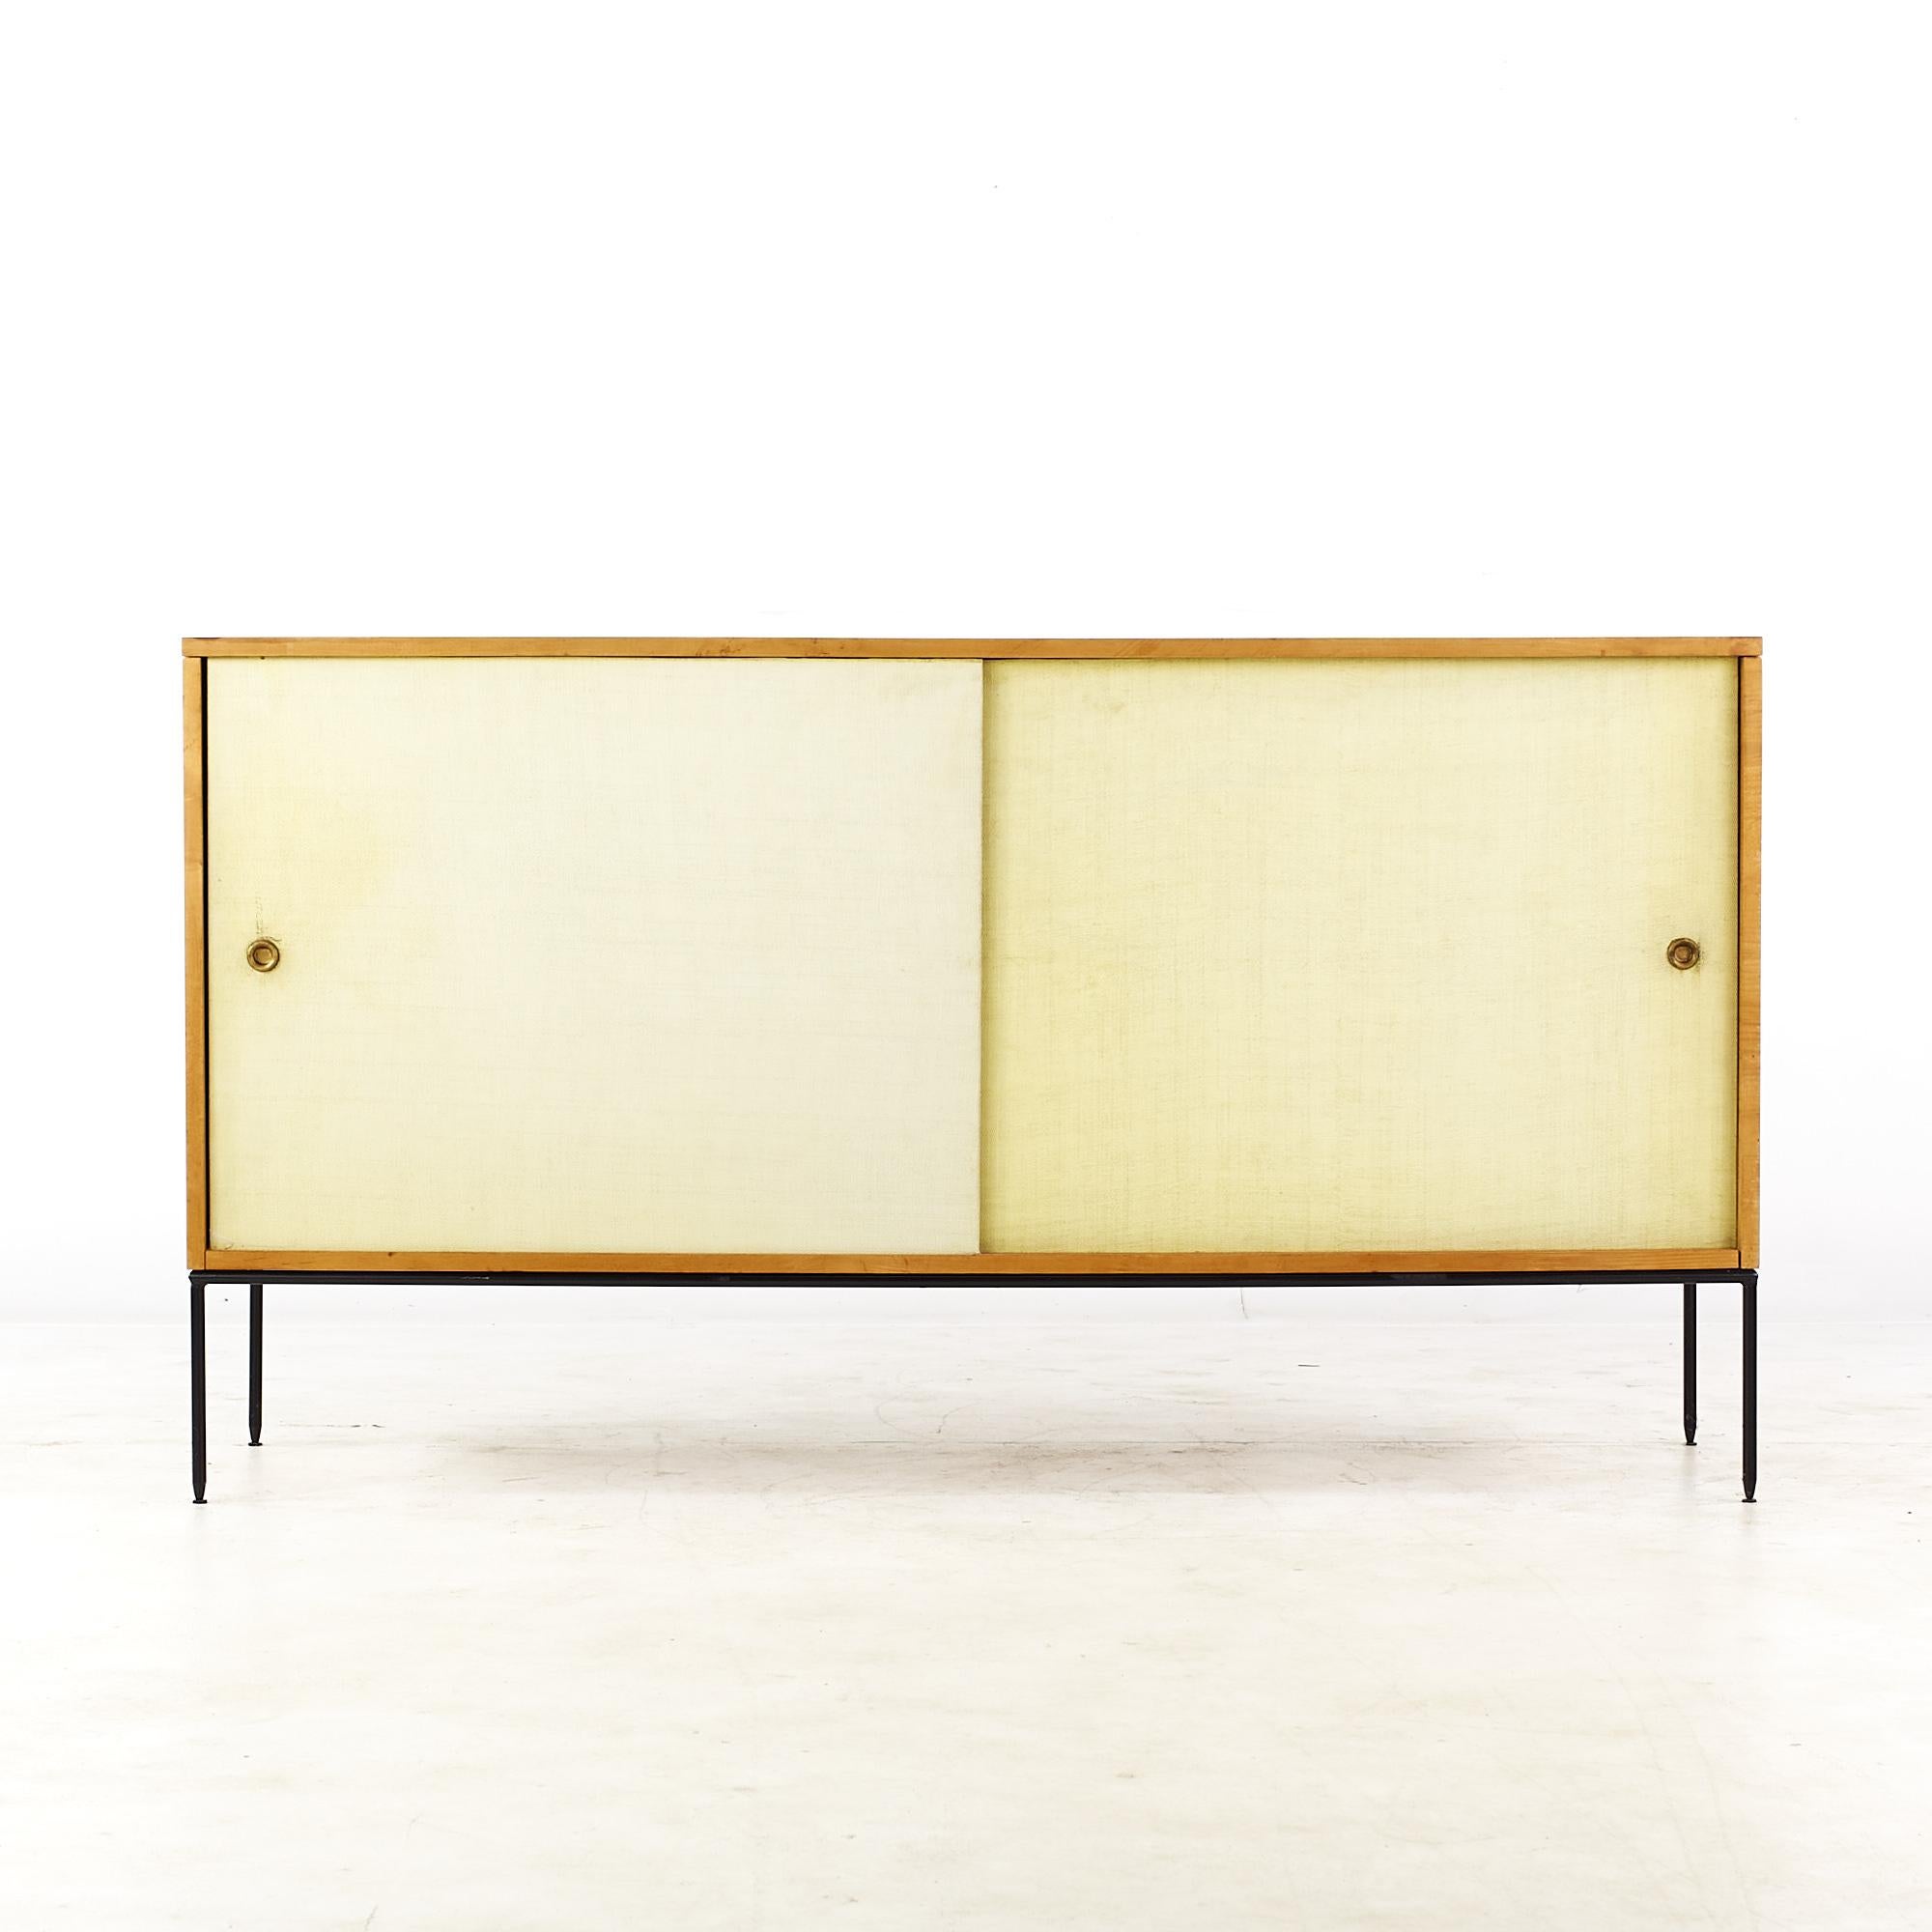 Paul McCobb Planner group mid century 1514 iron base white cloth door credenza

This credenza measures: 60 wide x 18 deep x 33 inches high

All pieces of furniture can be had in what we call restored vintage condition. That means the piece is